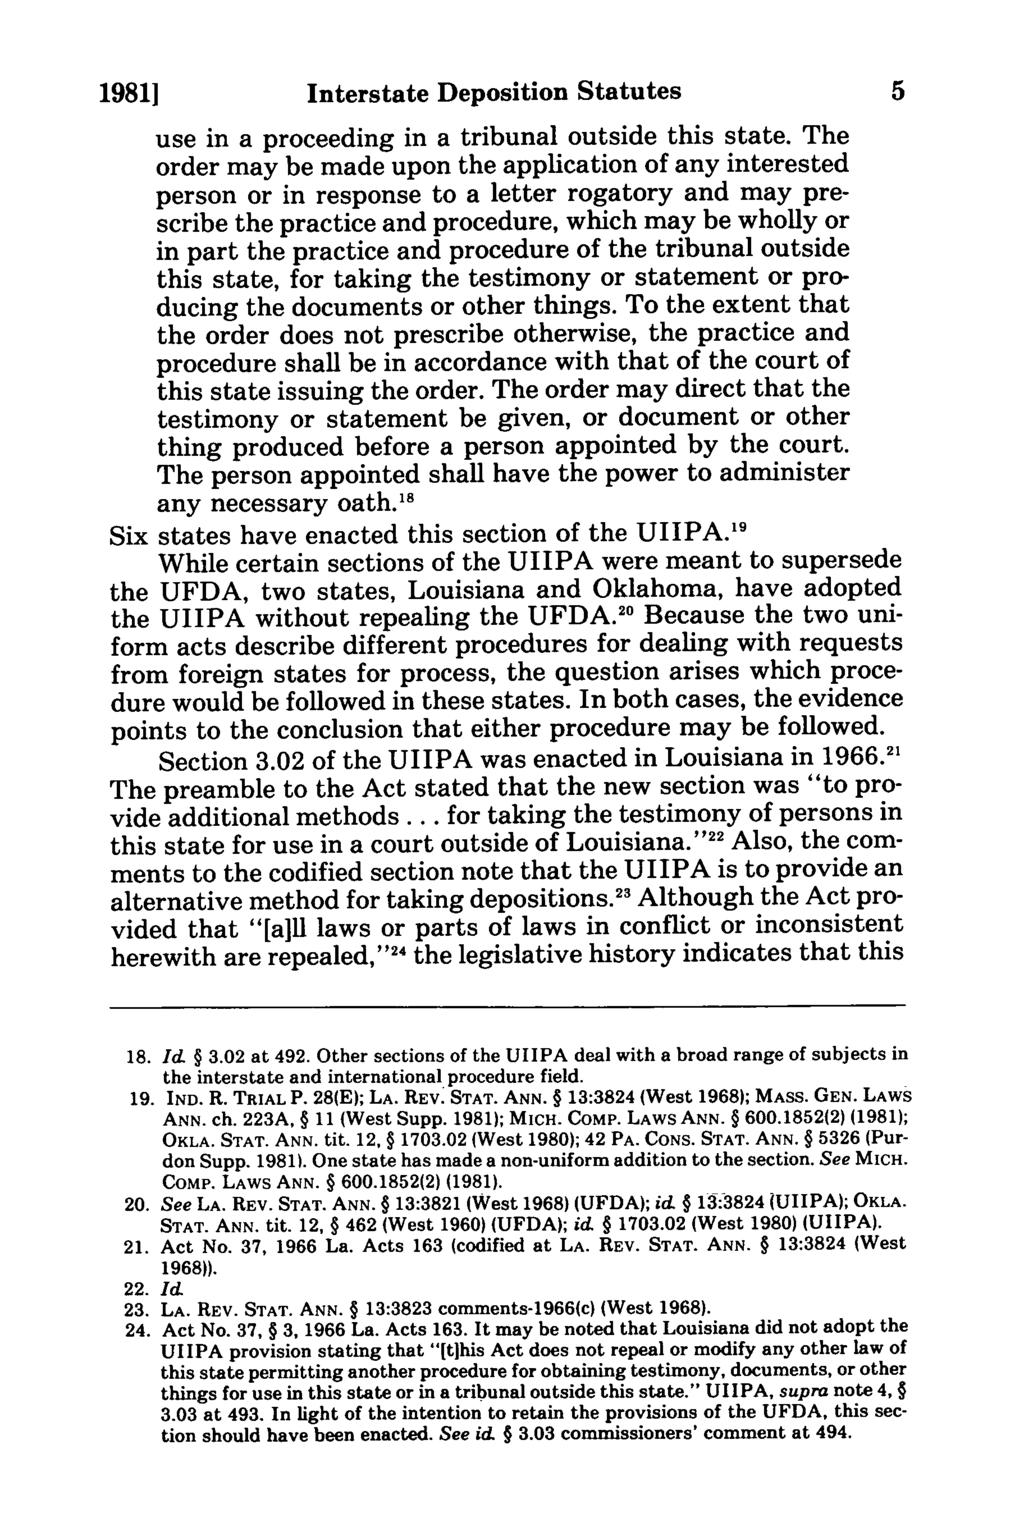 19811 Interstate Deposition Statutes use in a proceeding in a tribunal outside this state.